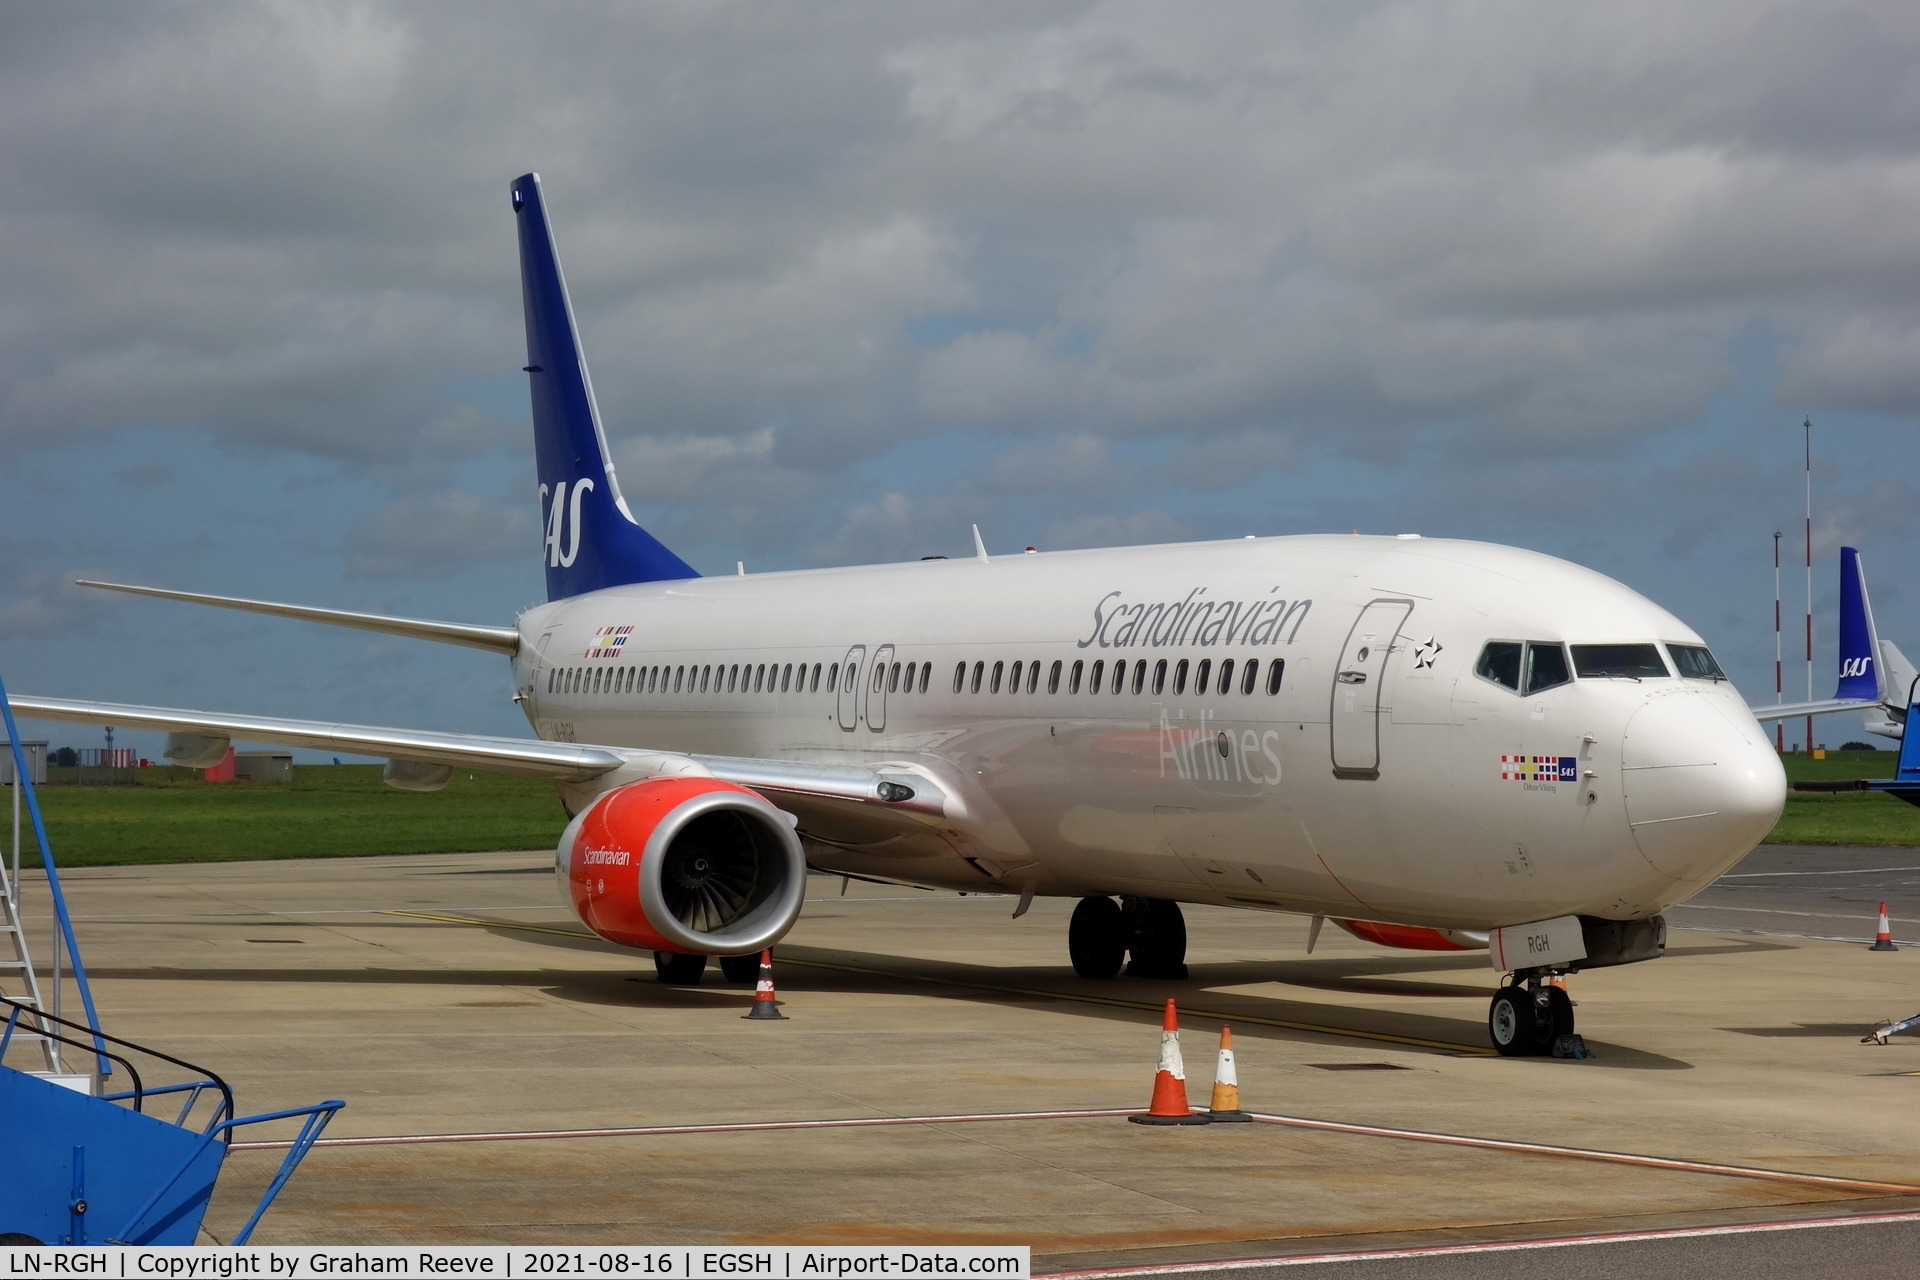 LN-RGH, 2013 Boeing 737-86N C/N 41266, Parked on stand 6, at Norwich.